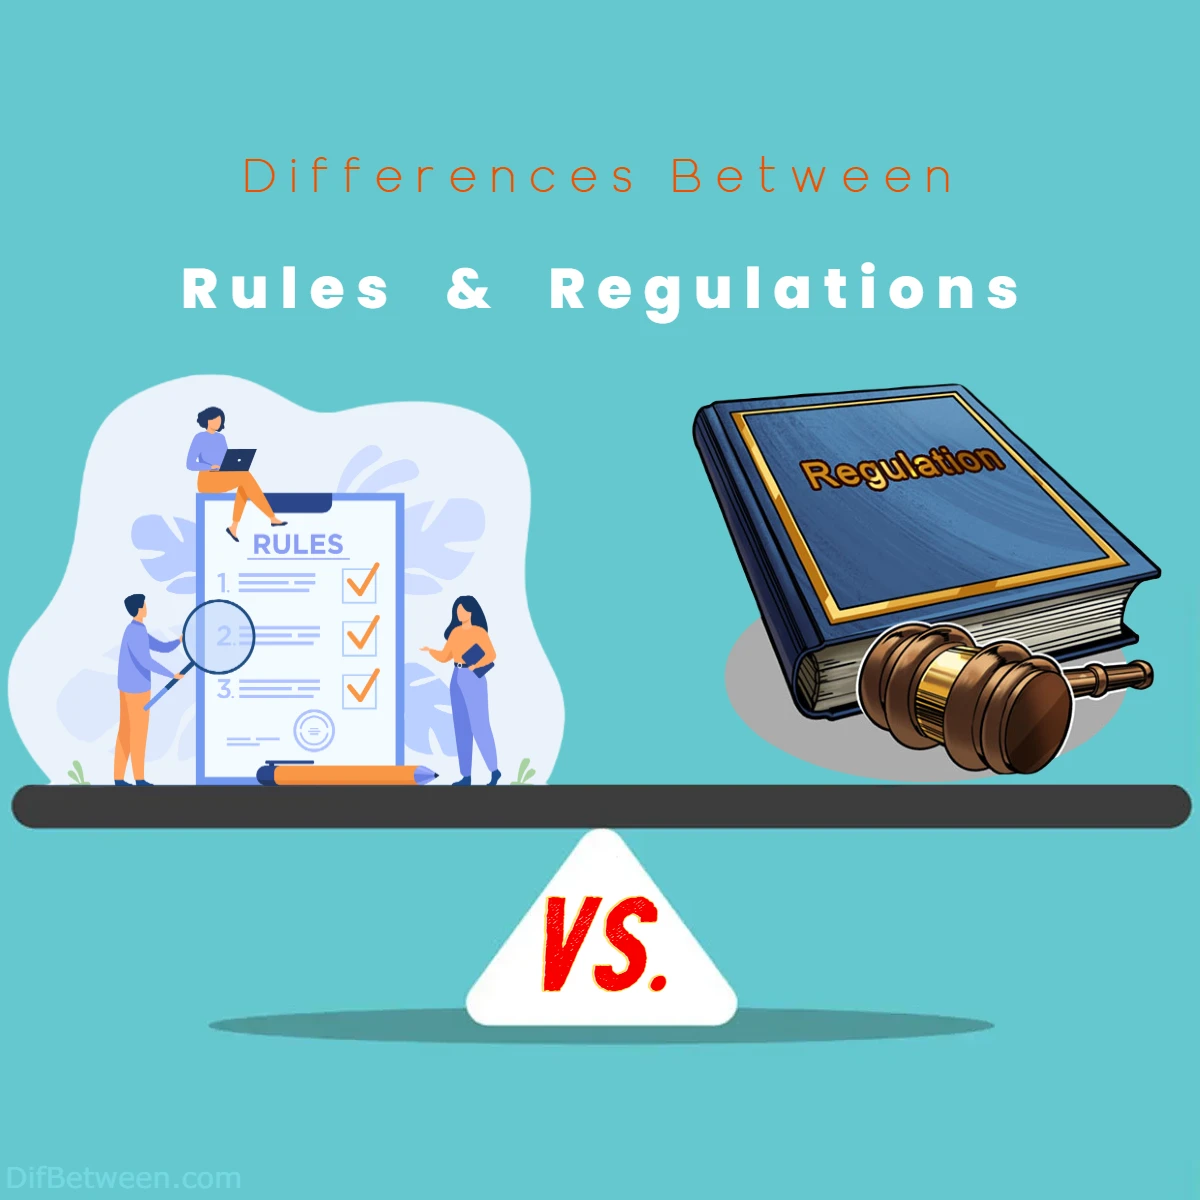 Differences Between Rules vs Regulations